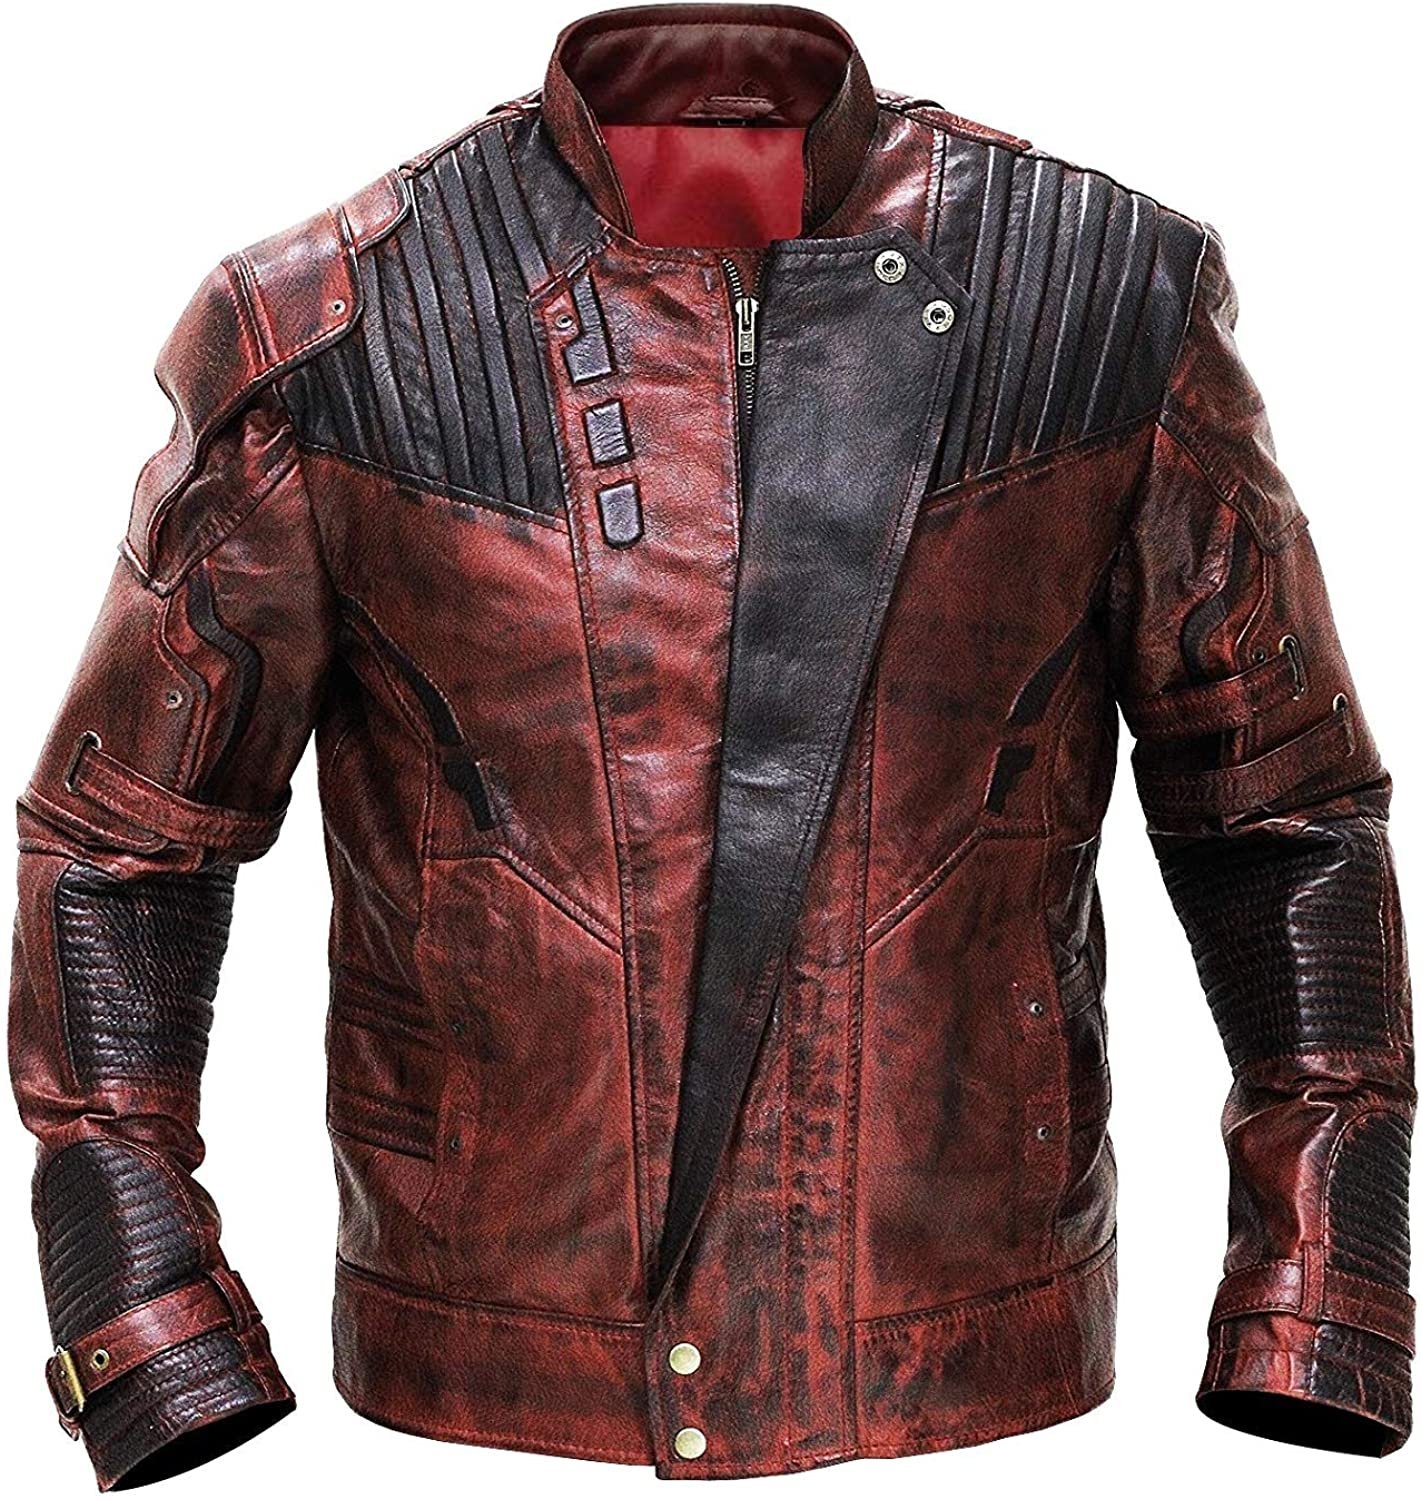 star-lord-guardians-of-the-galaxy-leather-jacket-superjackets